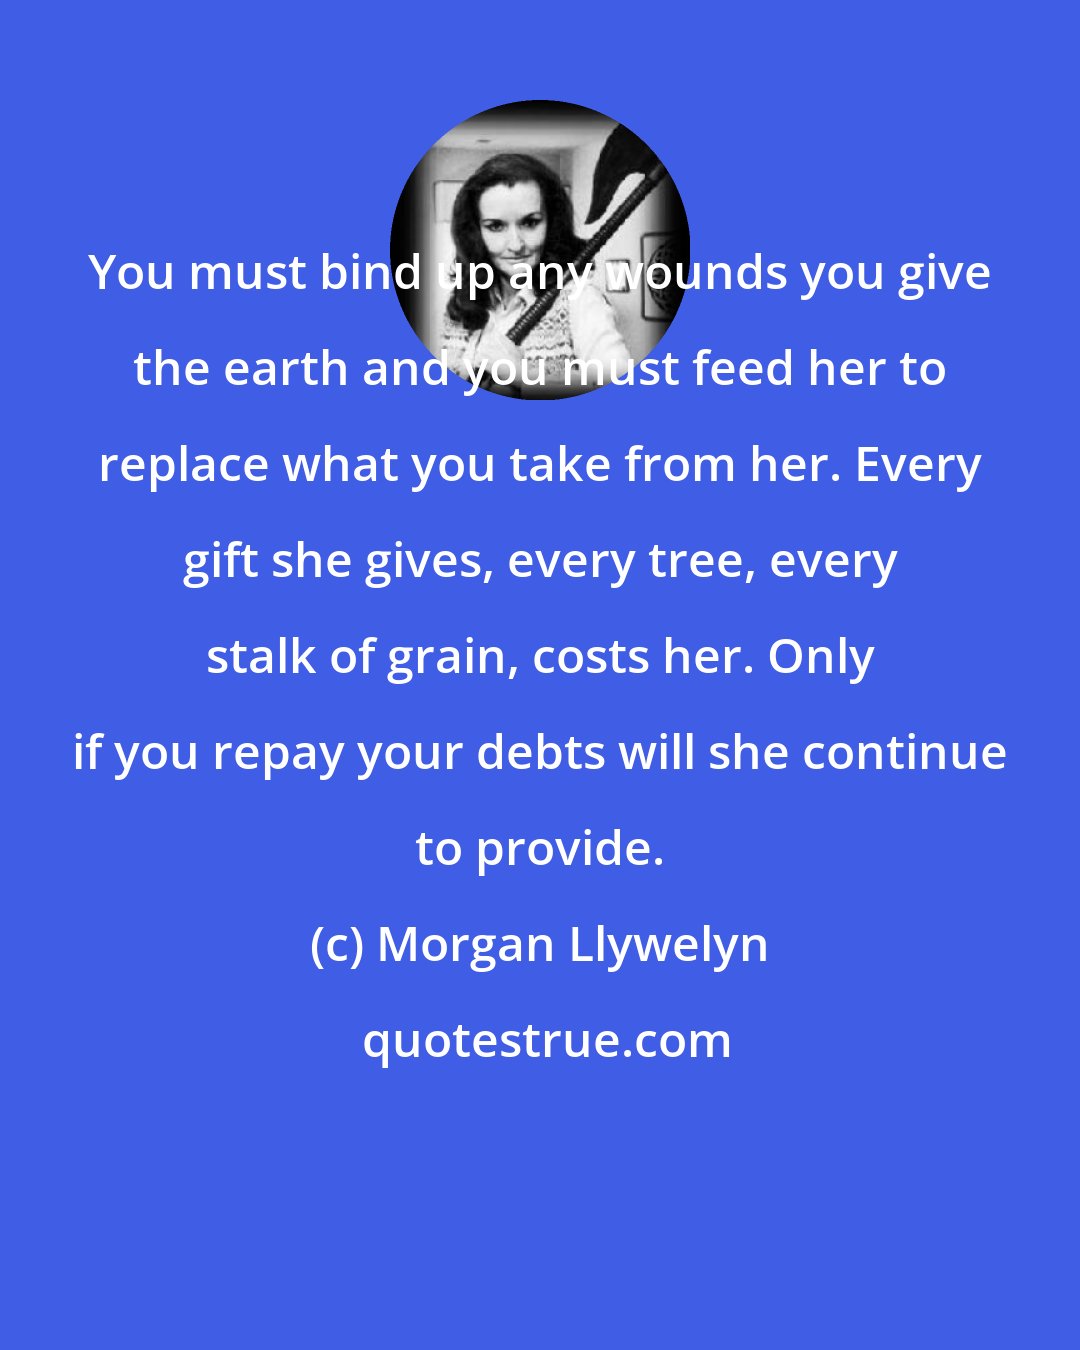 Morgan Llywelyn: You must bind up any wounds you give the earth and you must feed her to replace what you take from her. Every gift she gives, every tree, every stalk of grain, costs her. Only if you repay your debts will she continue to provide.